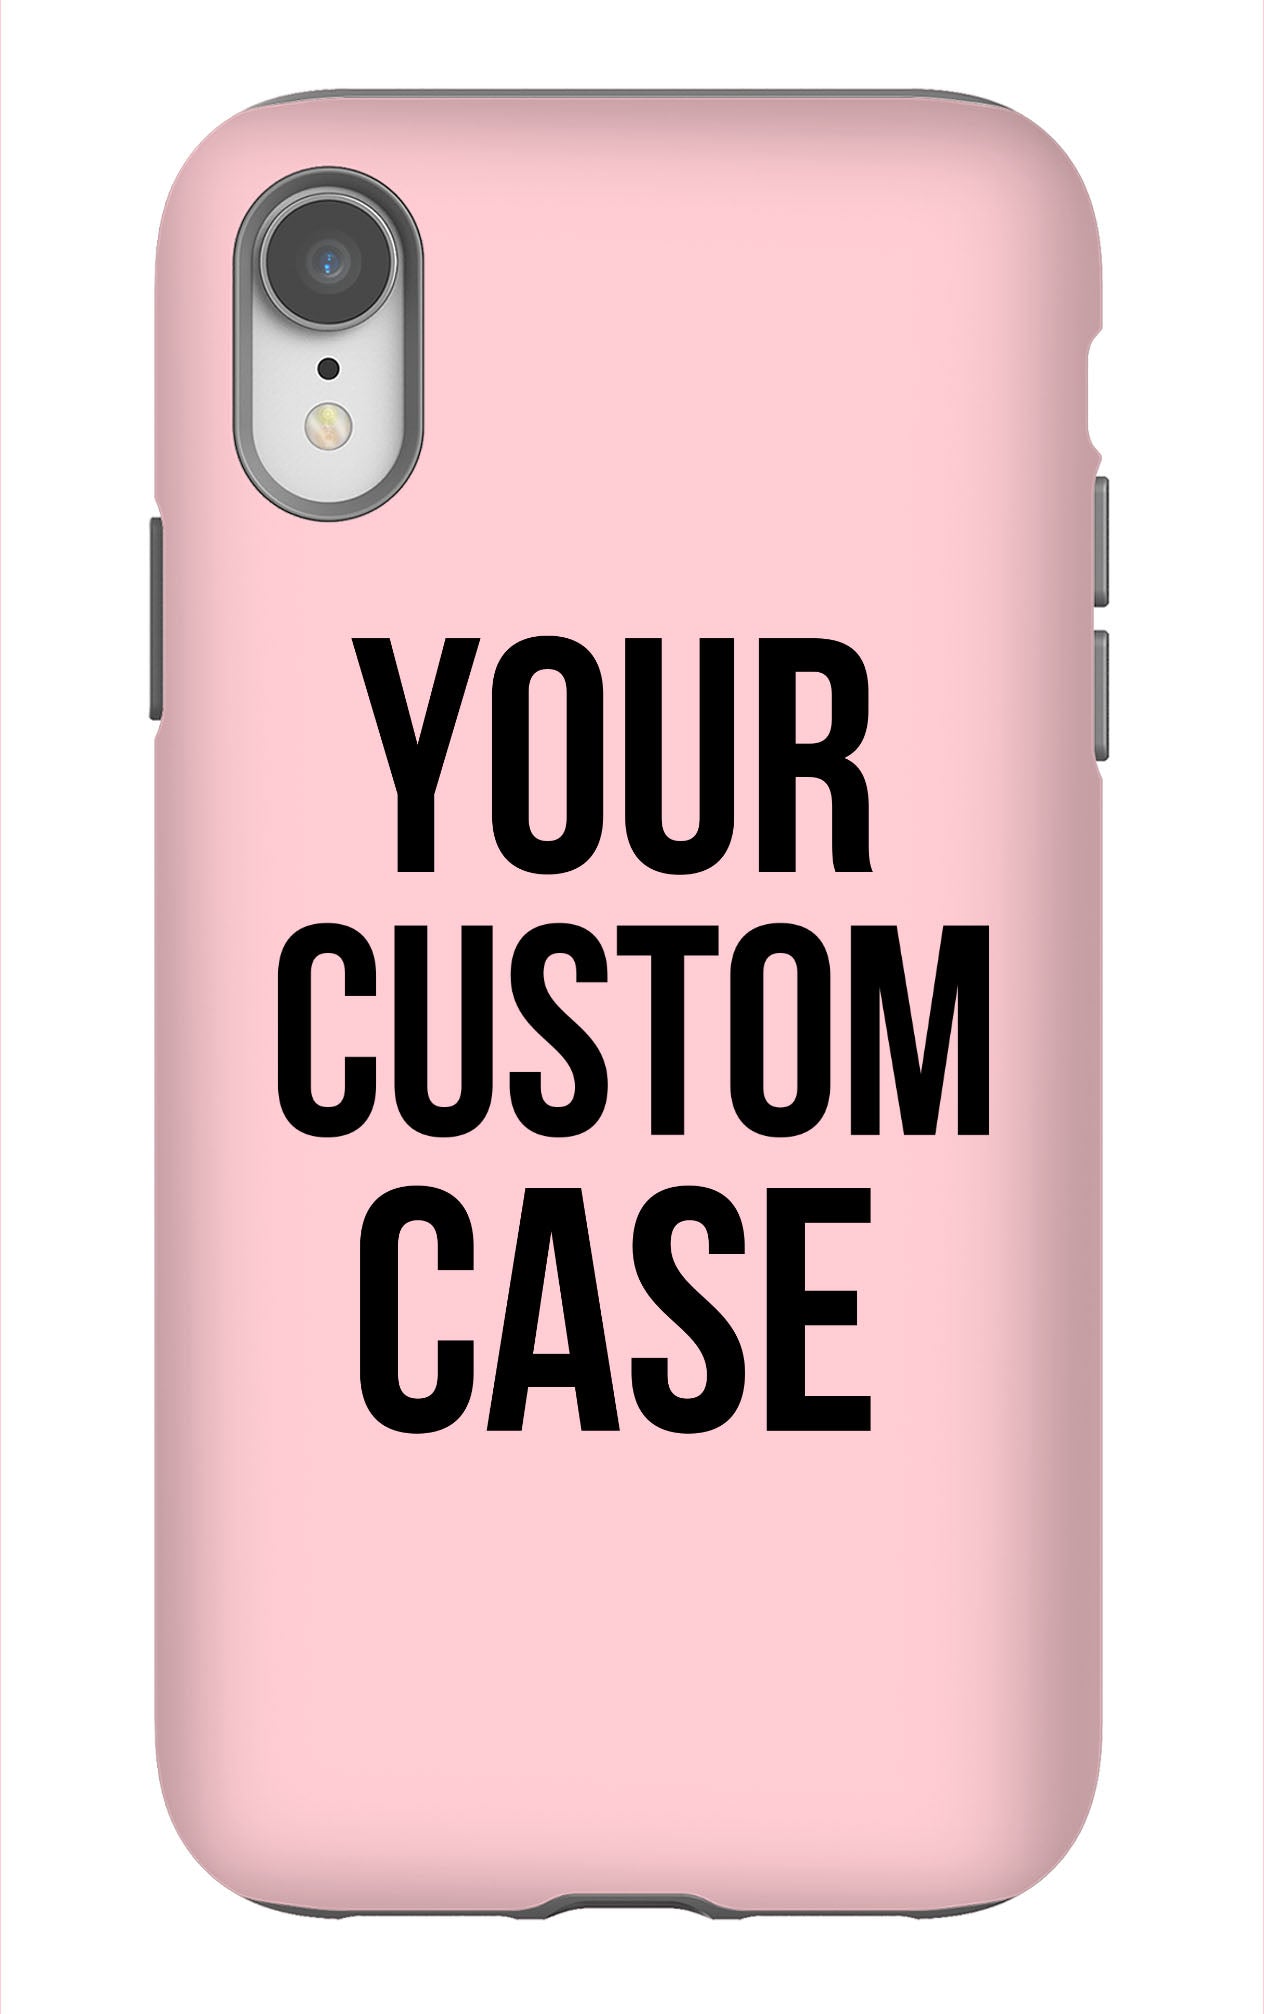 Custom iPhone XR Extra Protective Bumper Case - Your Custom Design in Cart will be Shipped - Pixly Case